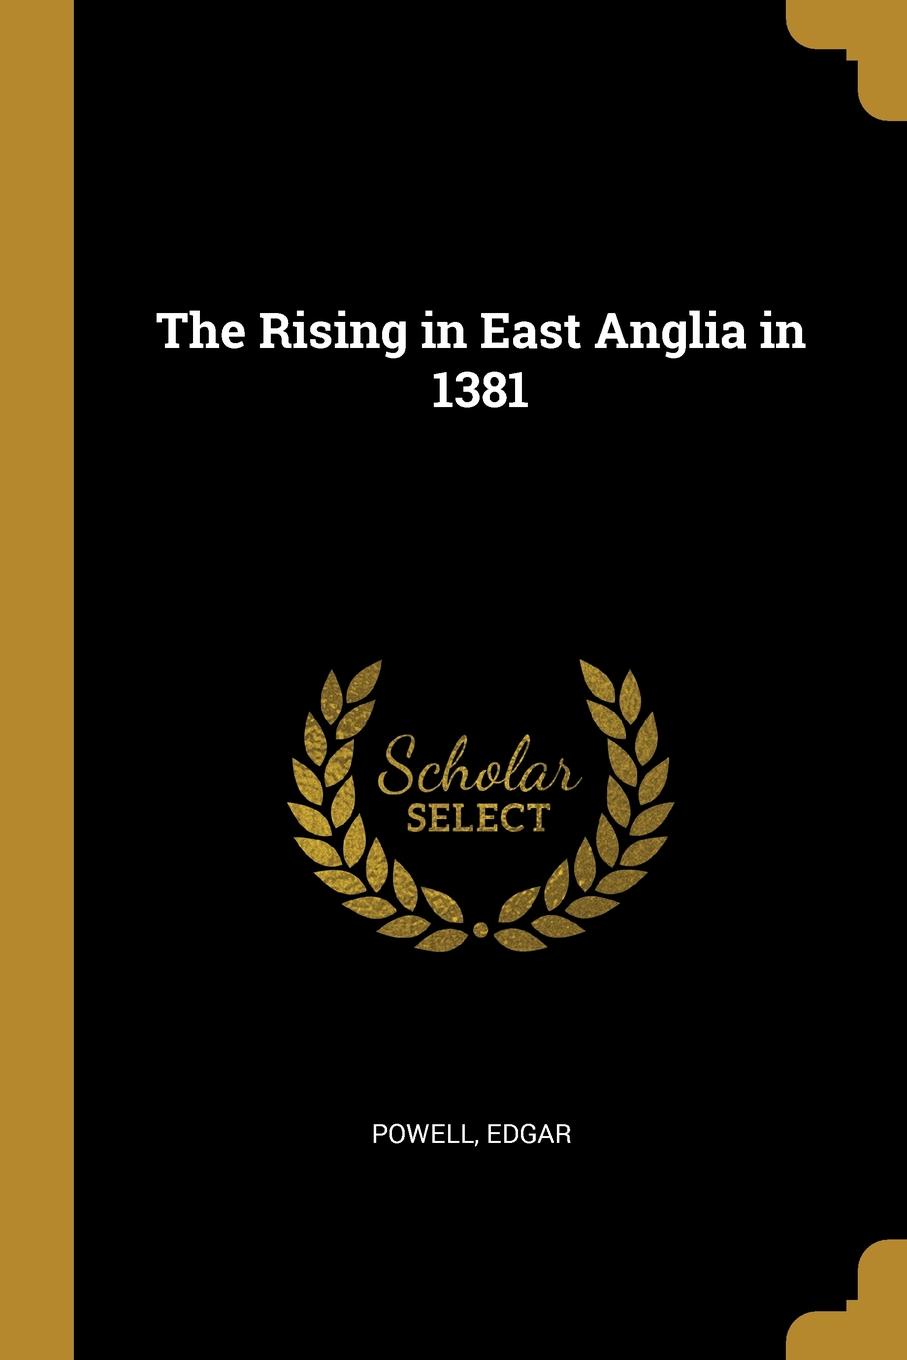 The Rising in East Anglia in 1381